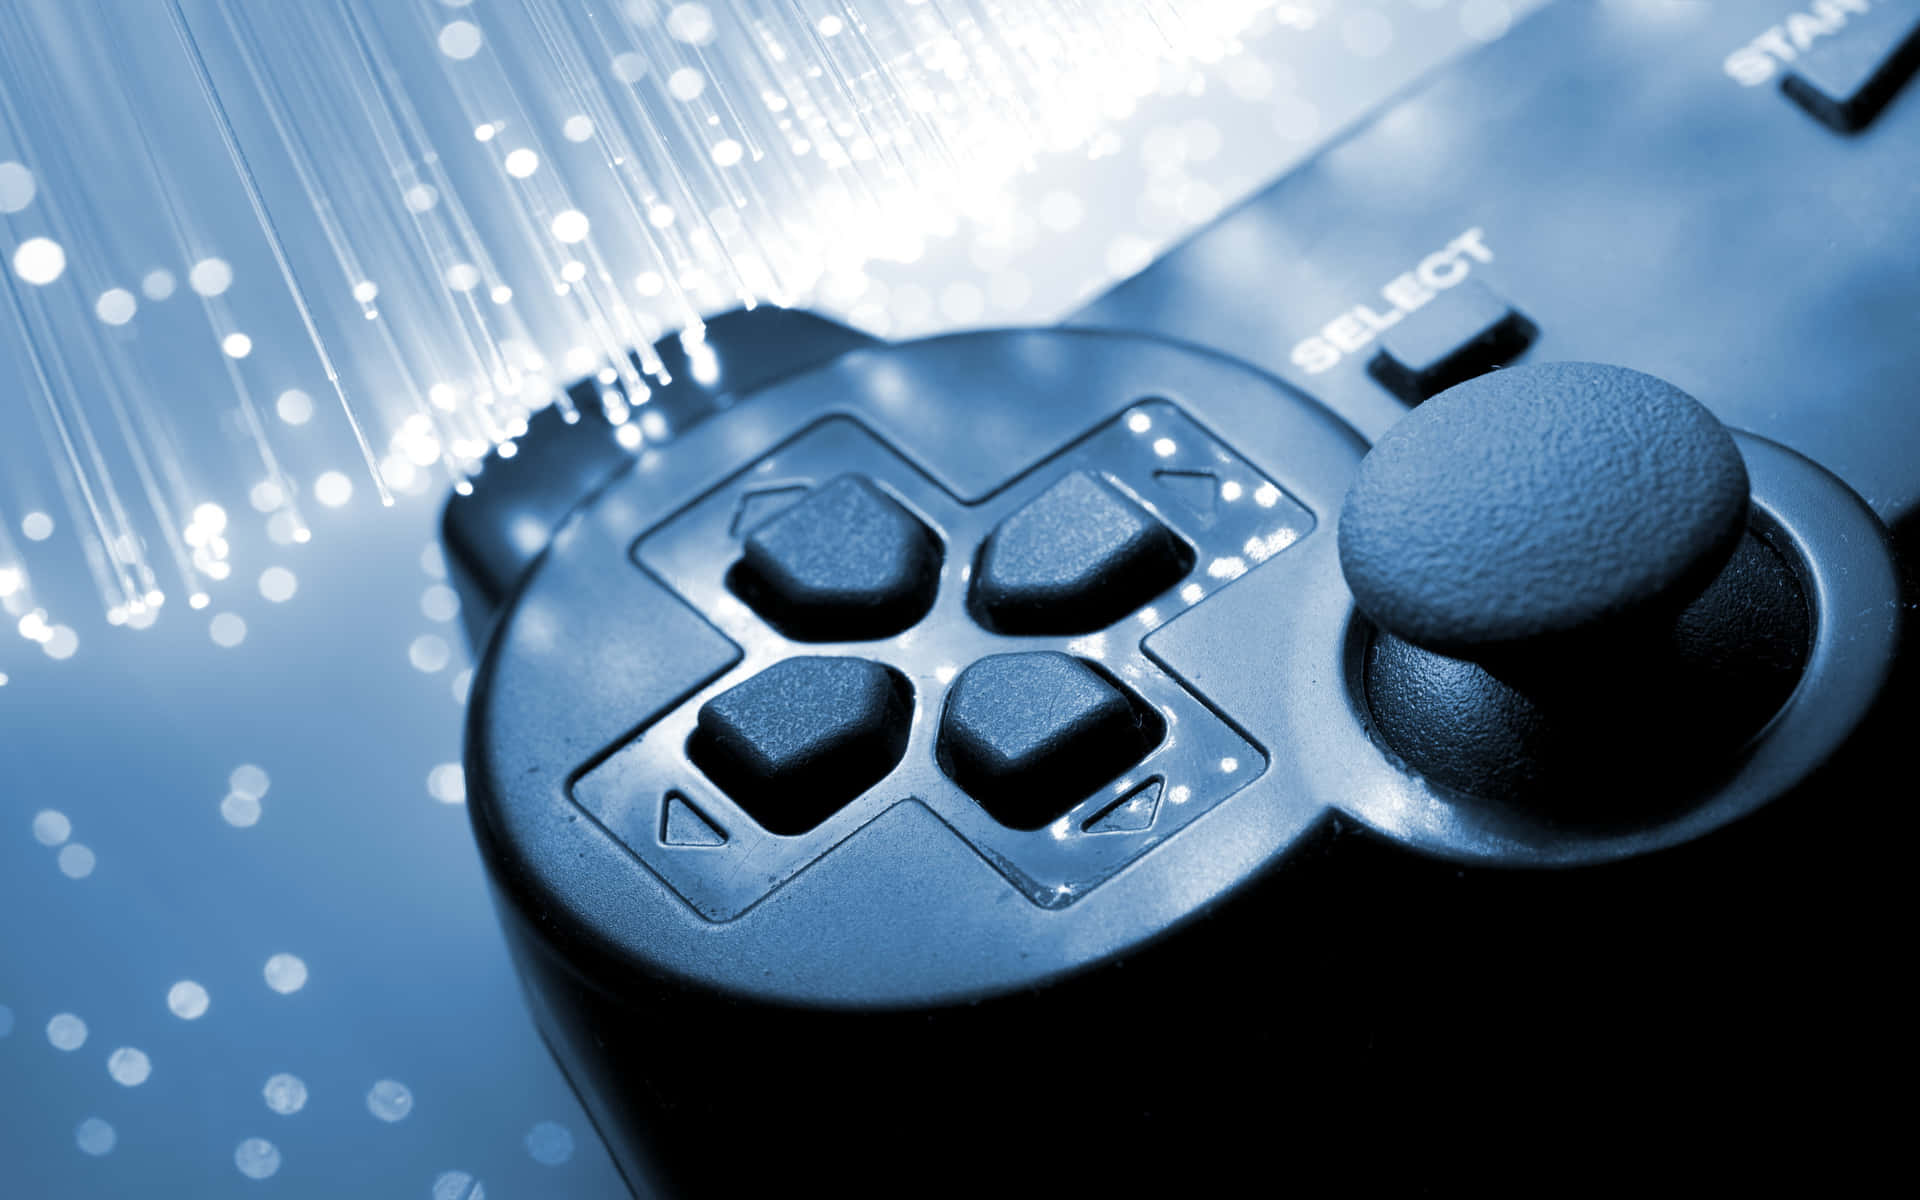 Remote Game Controller D-pad Close-up Wallpaper